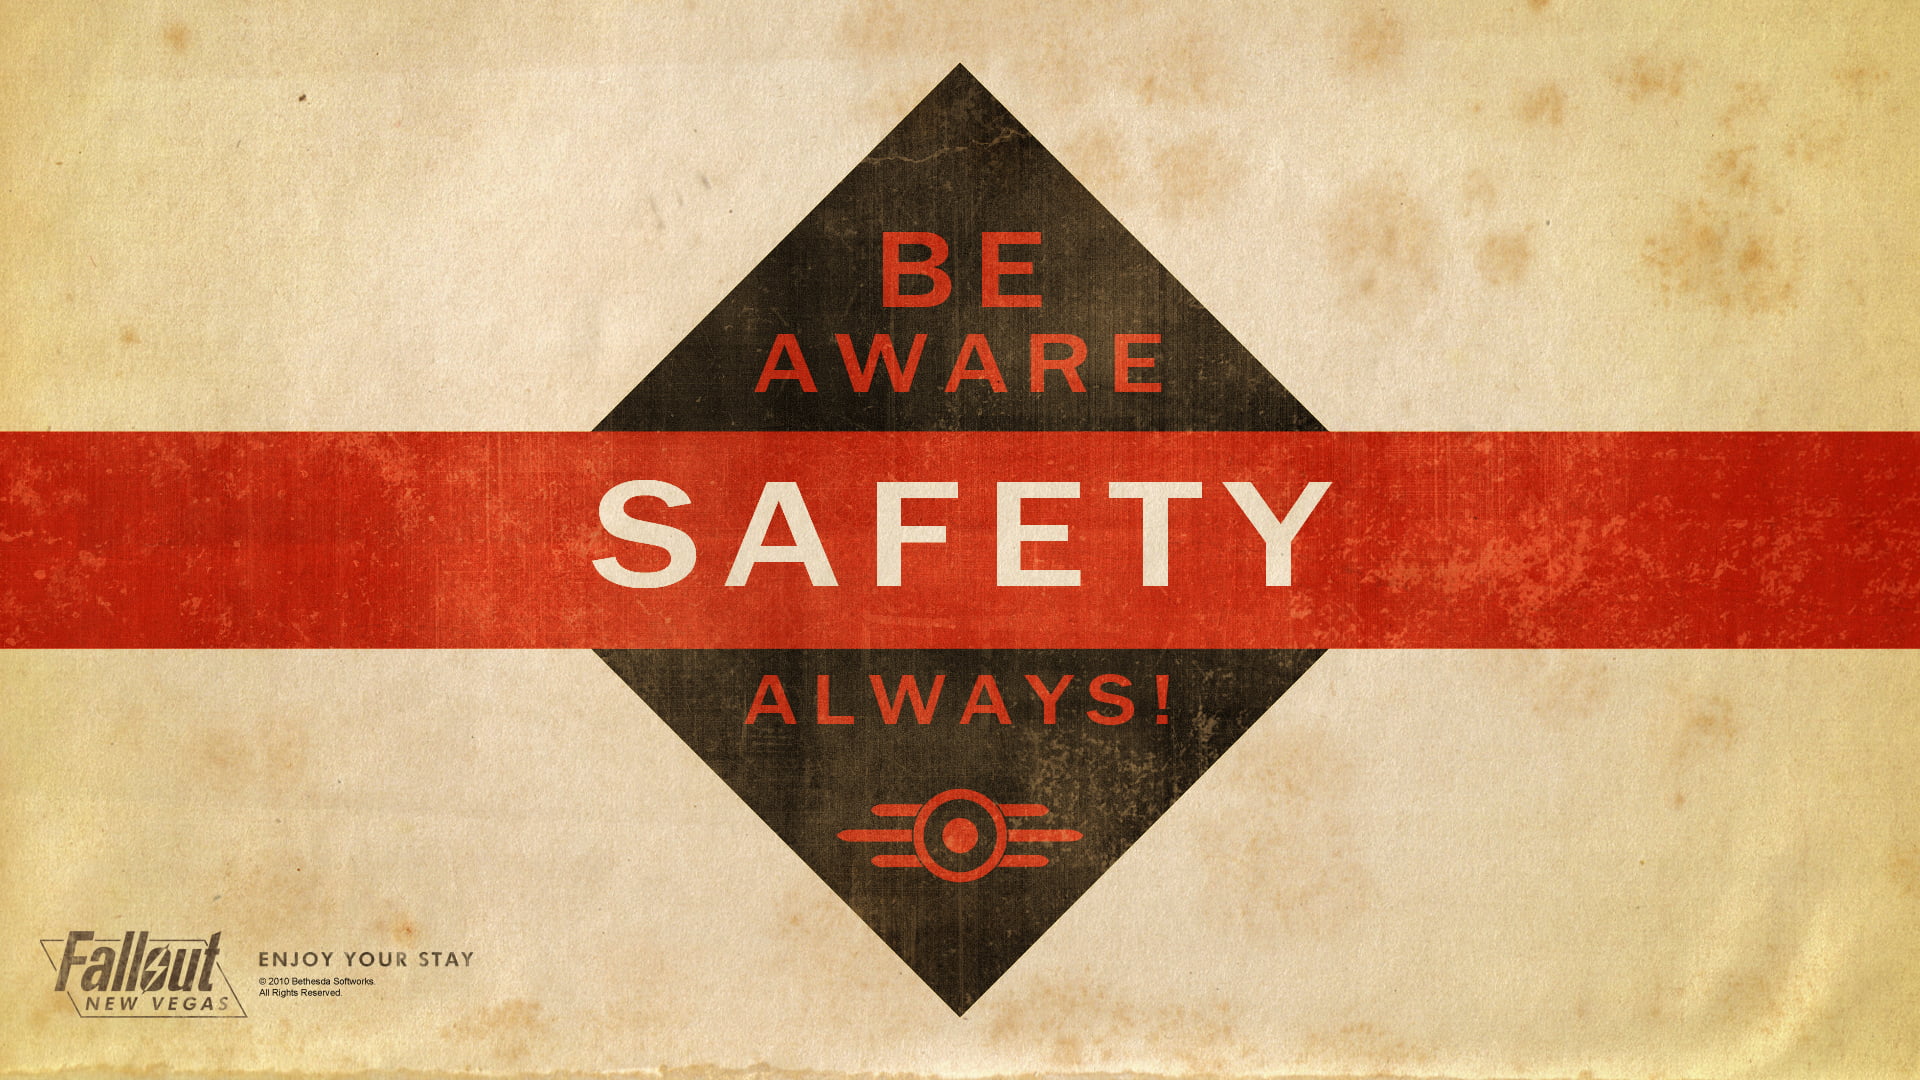 Be Aware Safety Always! text, video games, Fallout, Fallout 3, Fallout: New Vegas